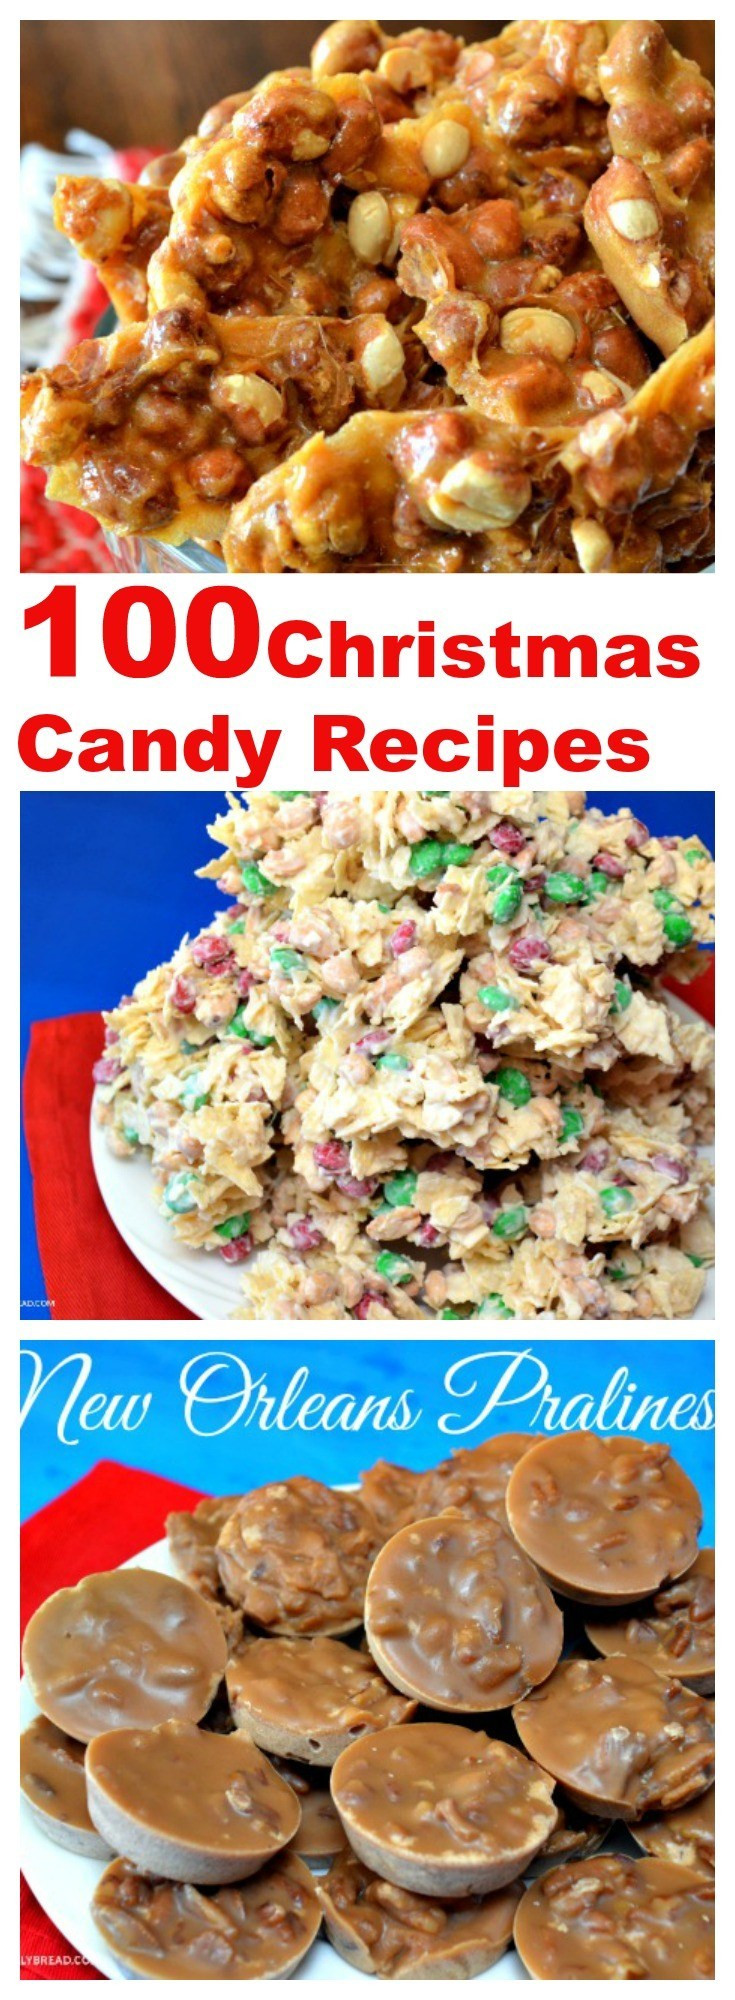 Best Christmas Candy Recipes
 BEST CHRISTMAS CANDY RECIPES ROUNDUP